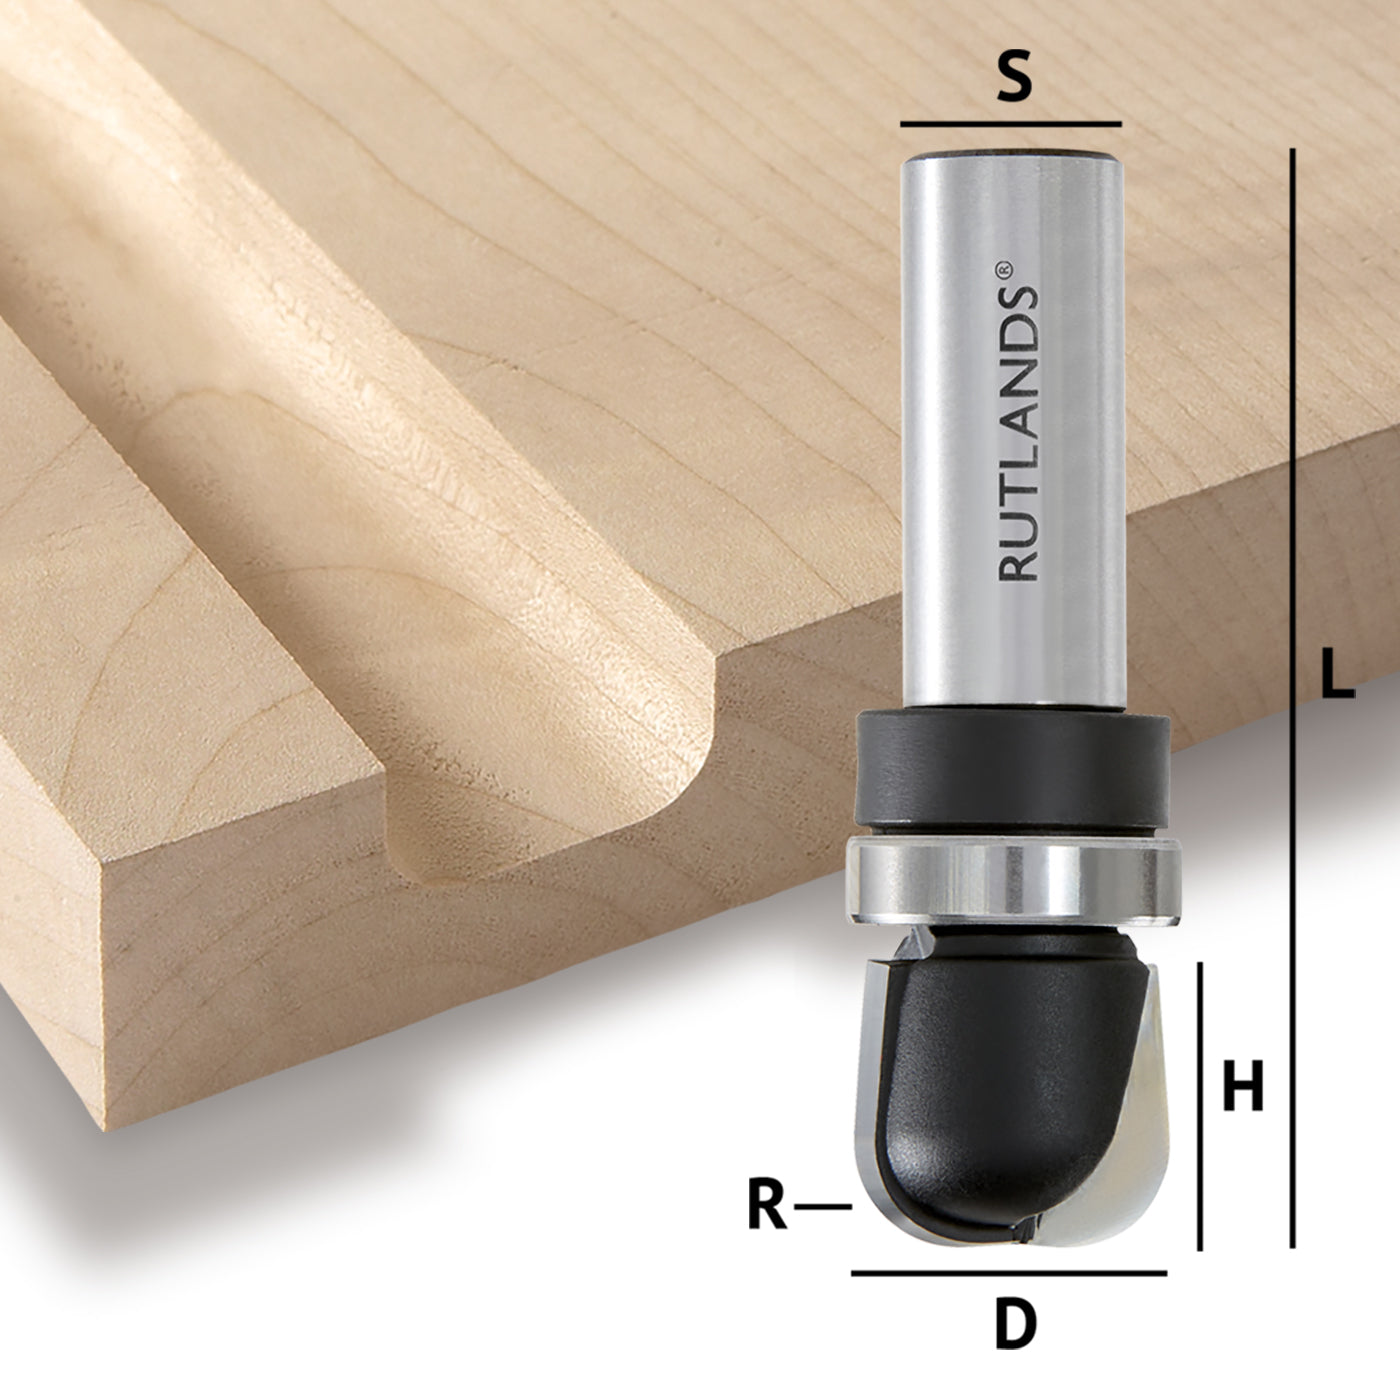 Router Bit - Bowl & Tray with Bearing - D=19mm H=16mm R=6mm L=62mm S=1/2"